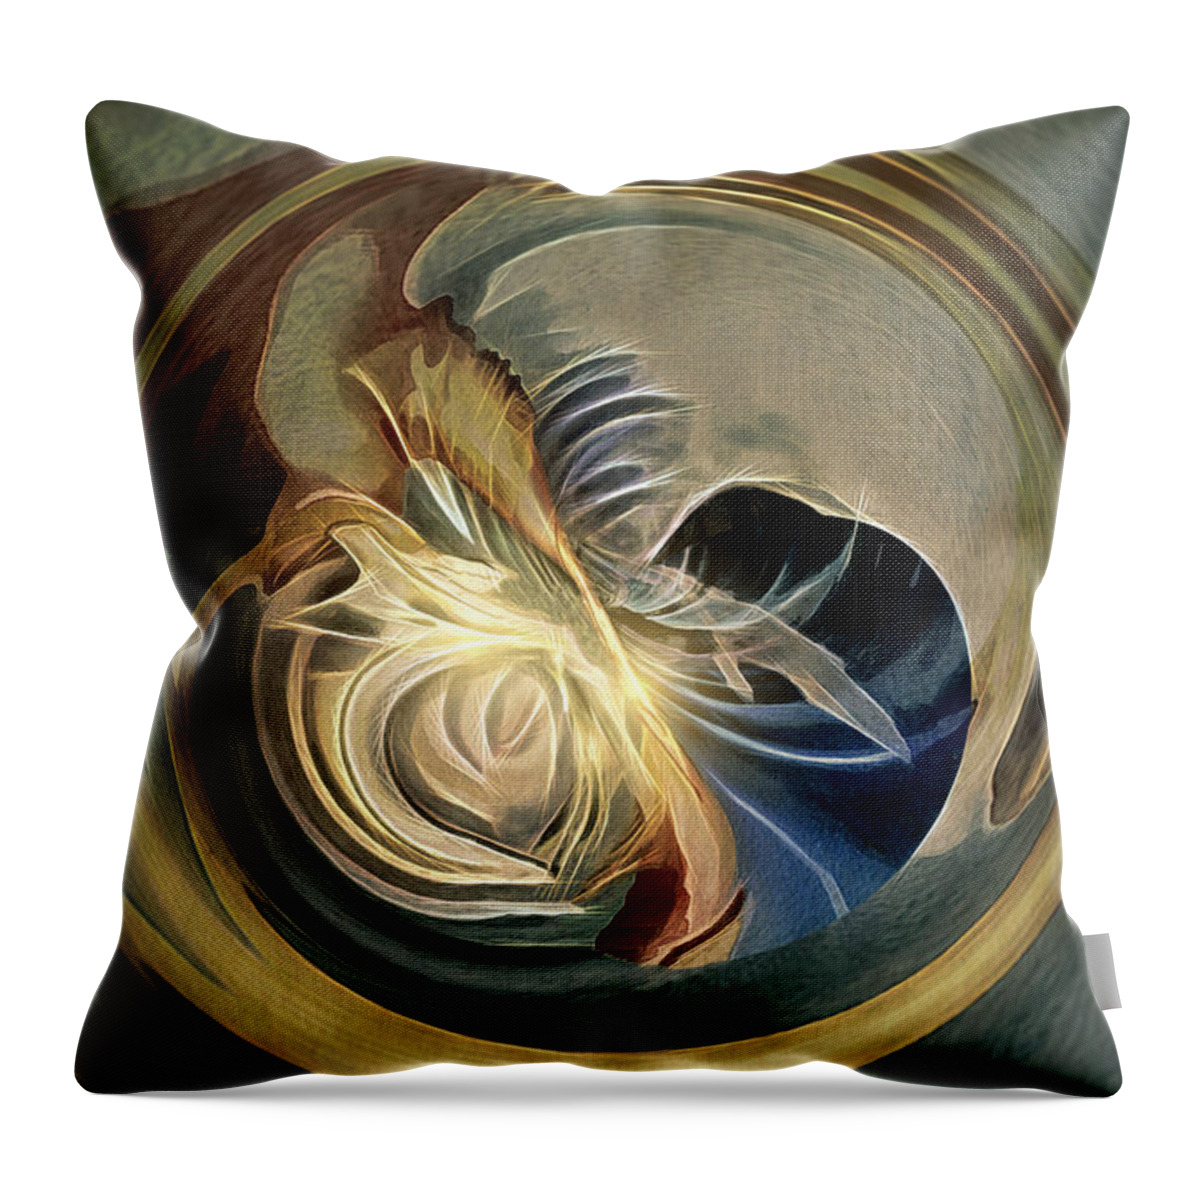 Abstract Throw Pillow featuring the digital art Oyster by Pennie McCracken